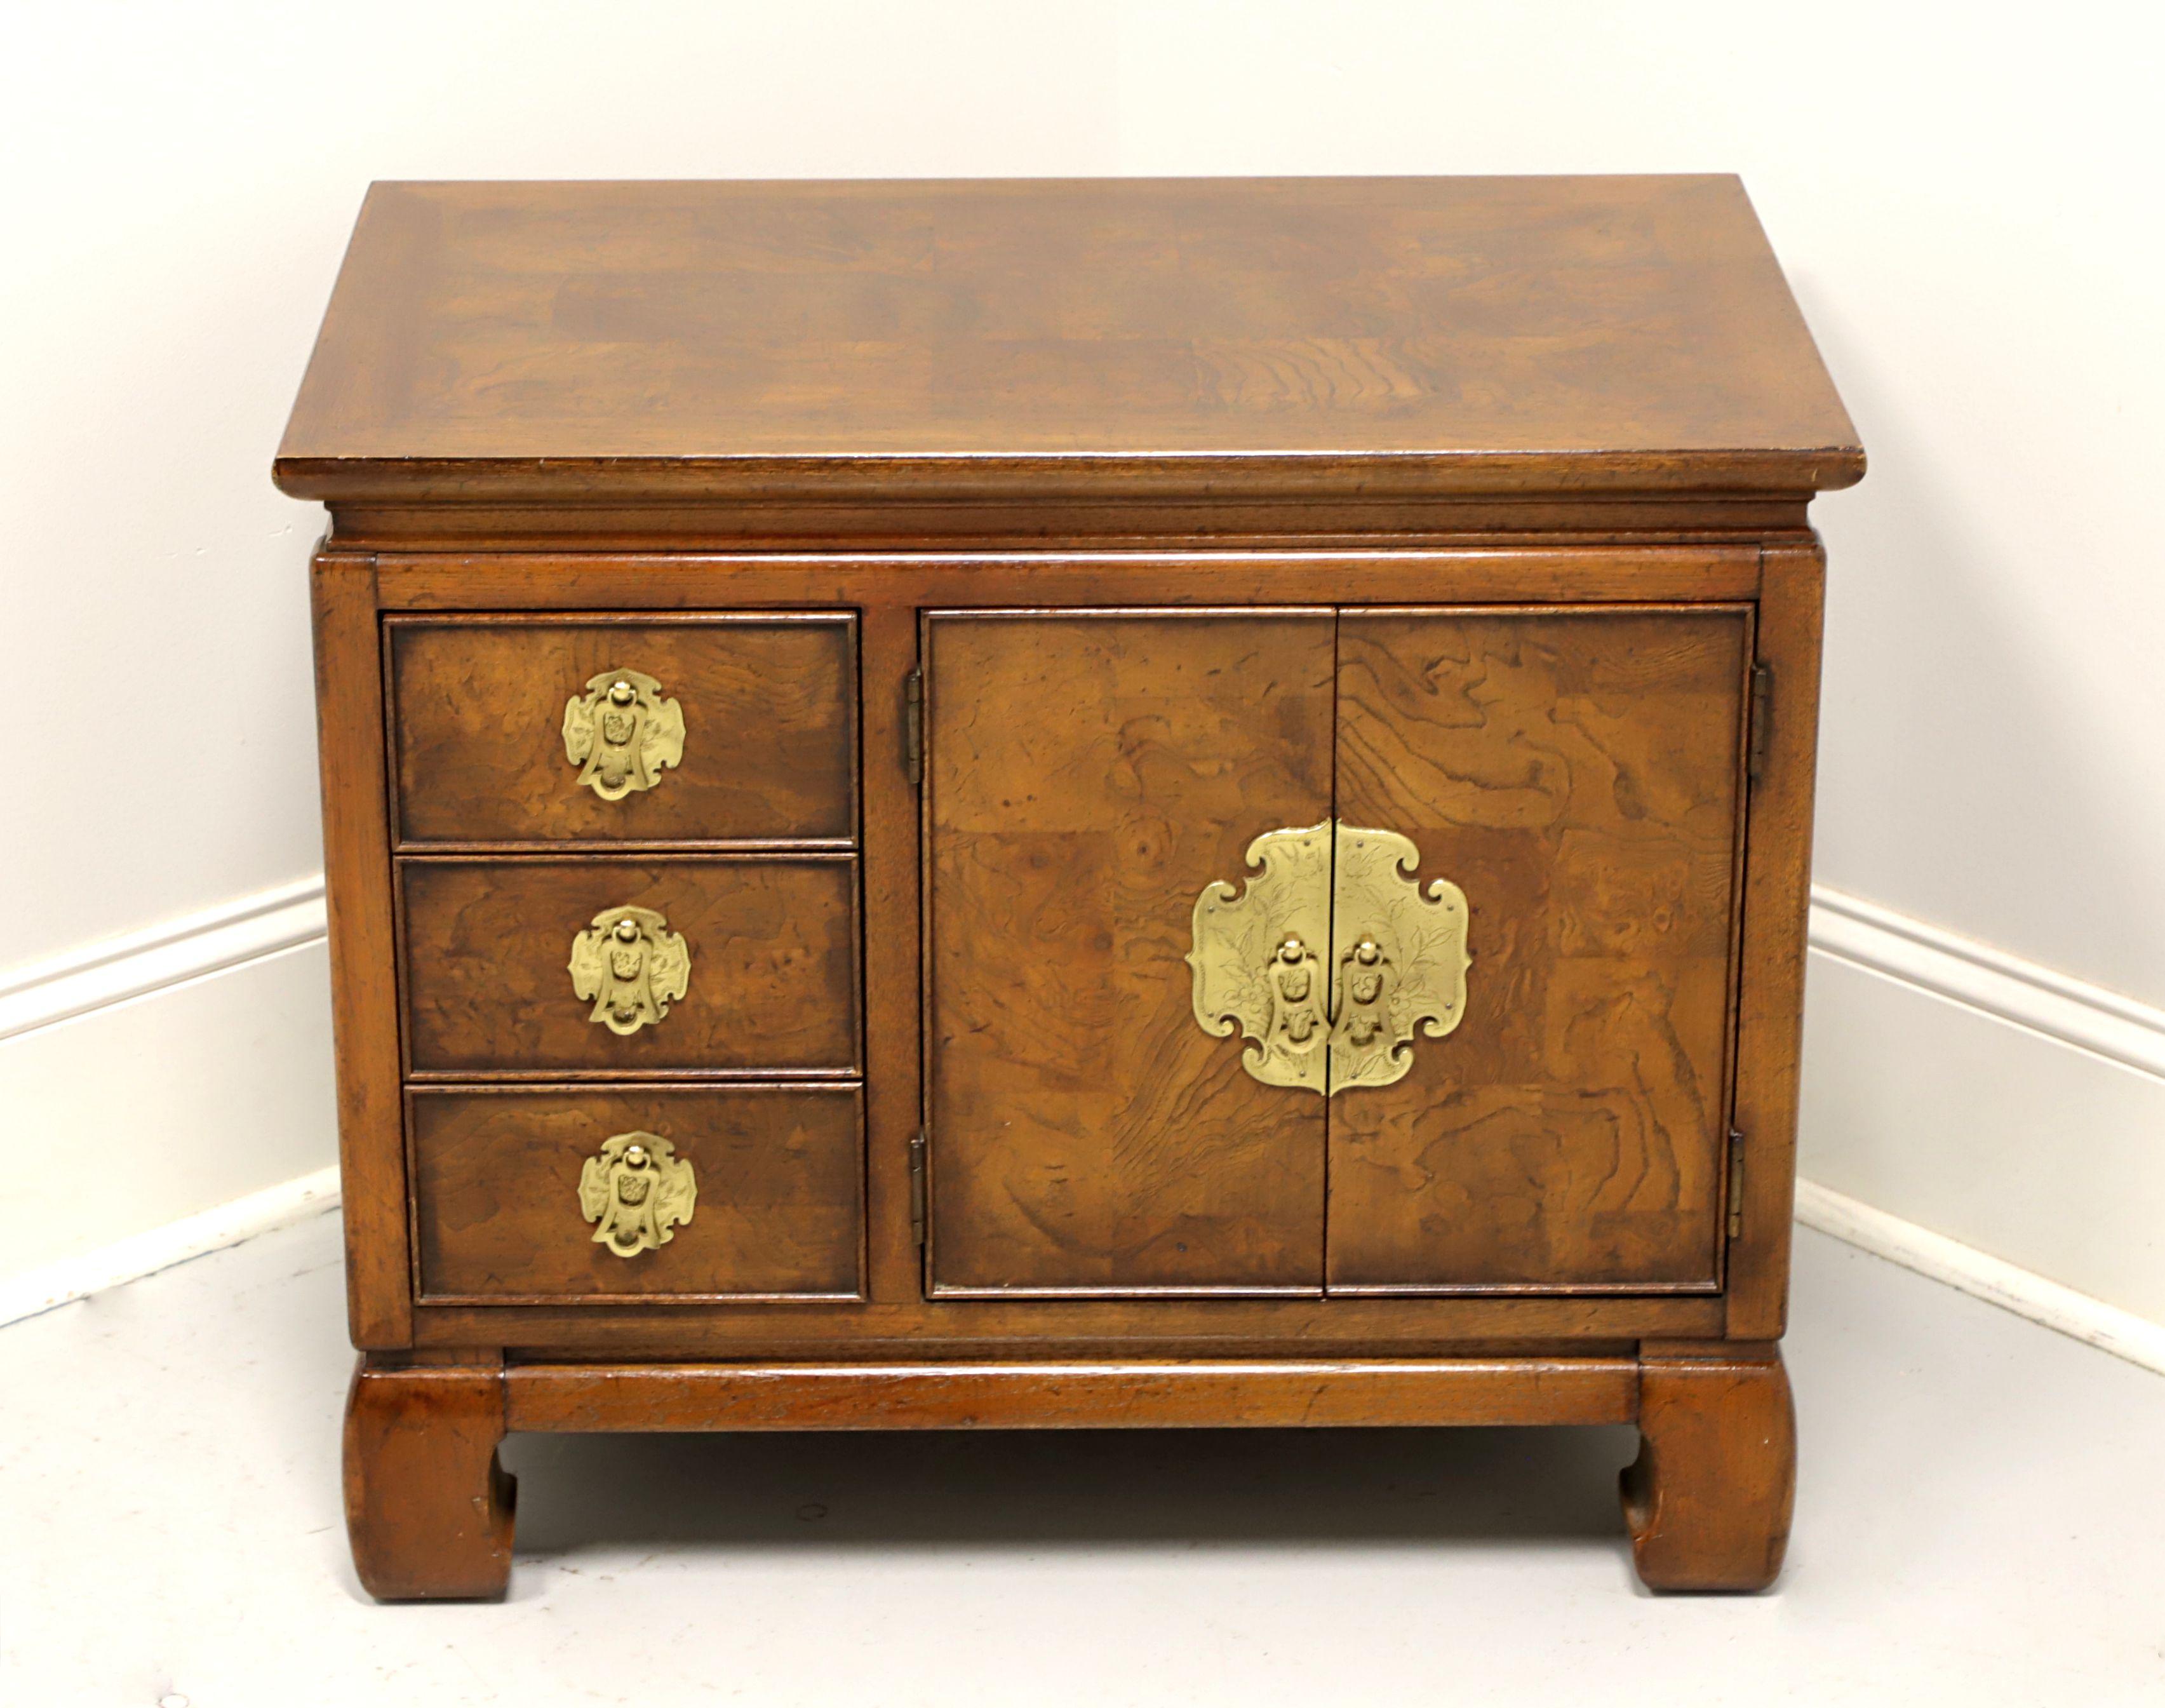 An Asian style nightstand by Gordon's Furniture, of Johnson City, Tennessee, USA. Fruitwood with a banded inlaid burlwood parquetry design to the top, burlwood to door & drawer fronts, brass hardware and scroll legs. Features three small drawers of